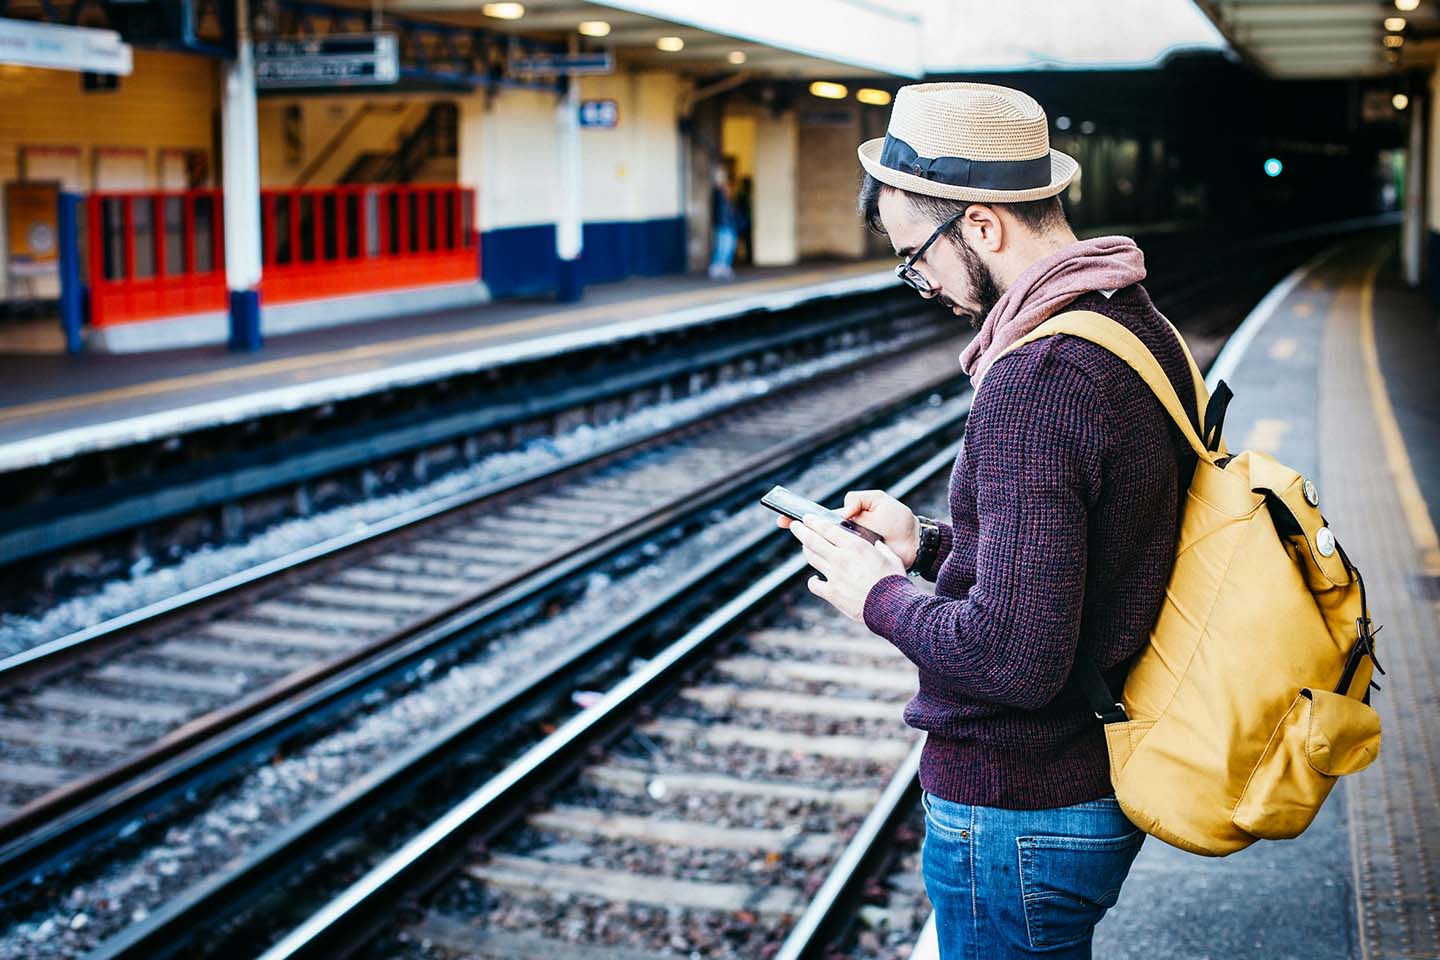 Man waiting for the train while looking at his phone at train station.